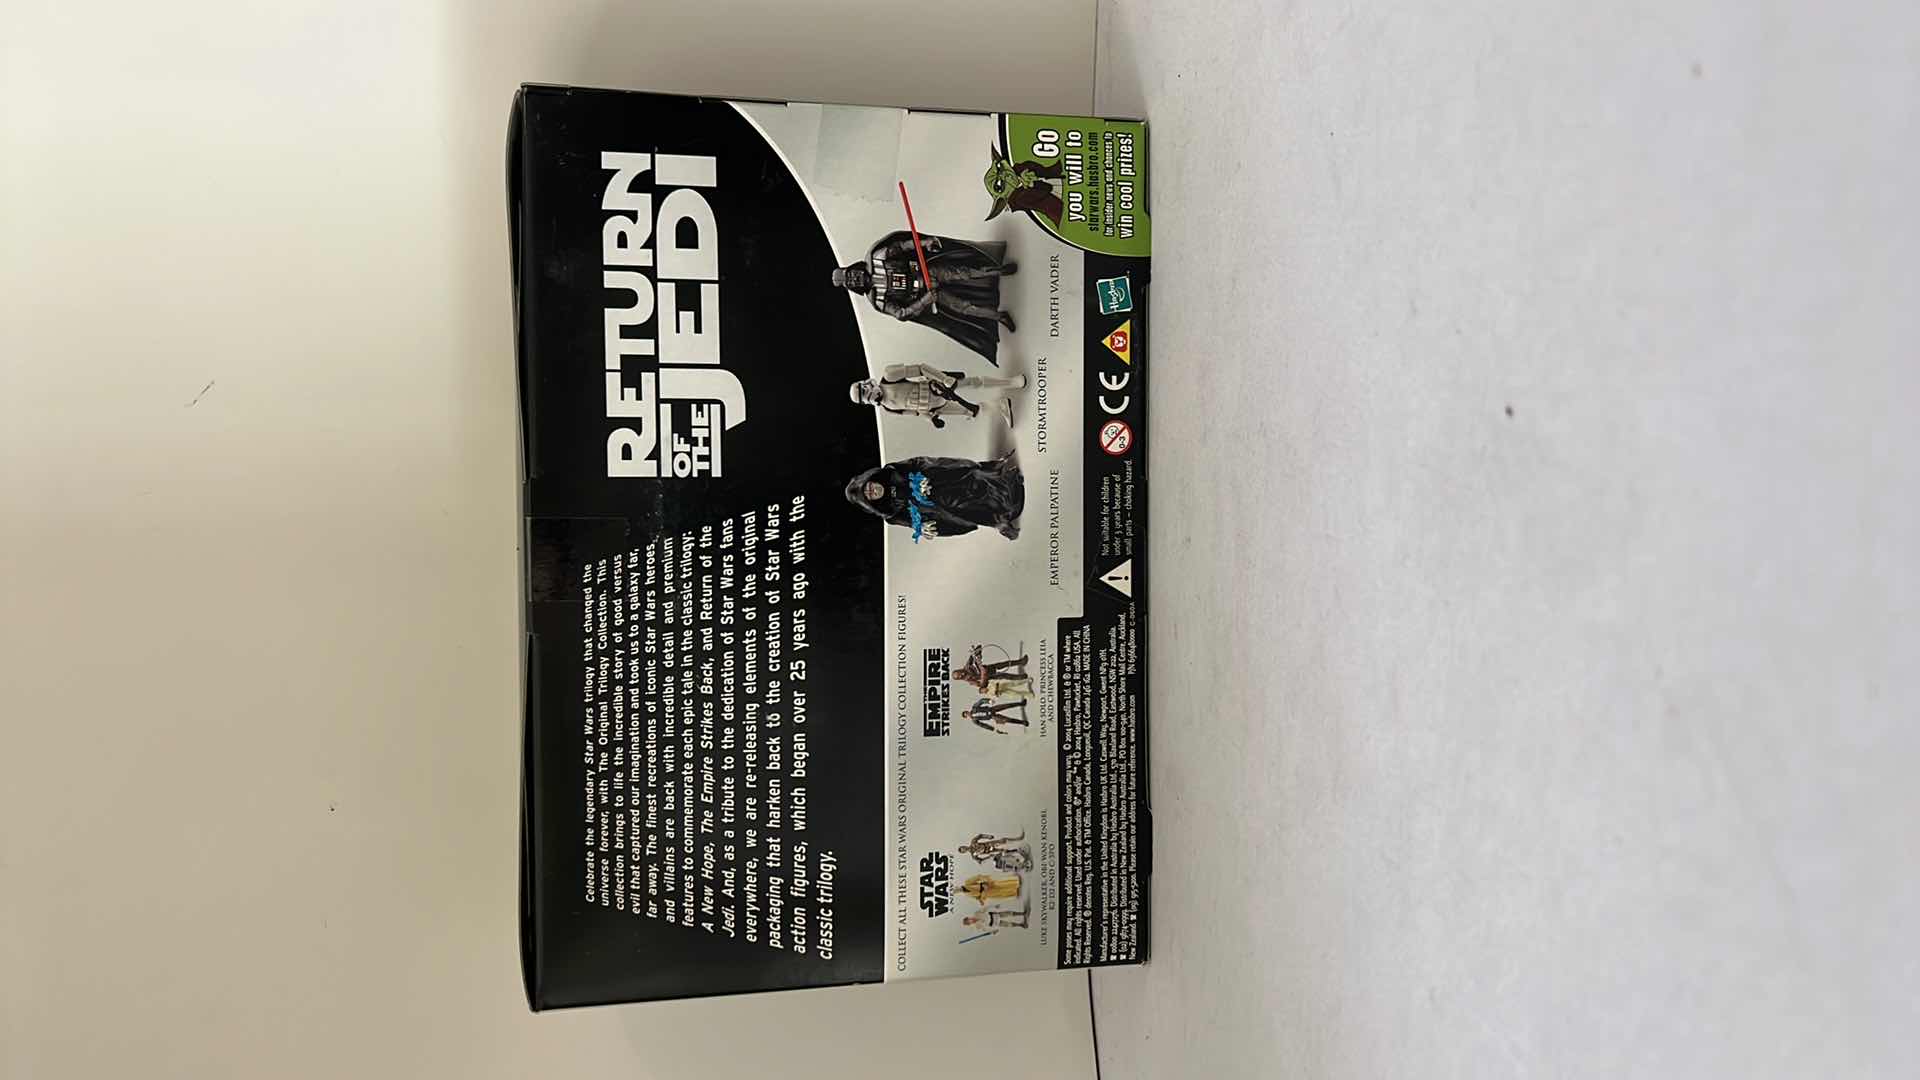 Photo 2 of BRAND NEW STAR WARS COMMEMORATIVE TRILOGY DVD COLLECTION (DVD NOT INCLUDED) FIGURINES $20